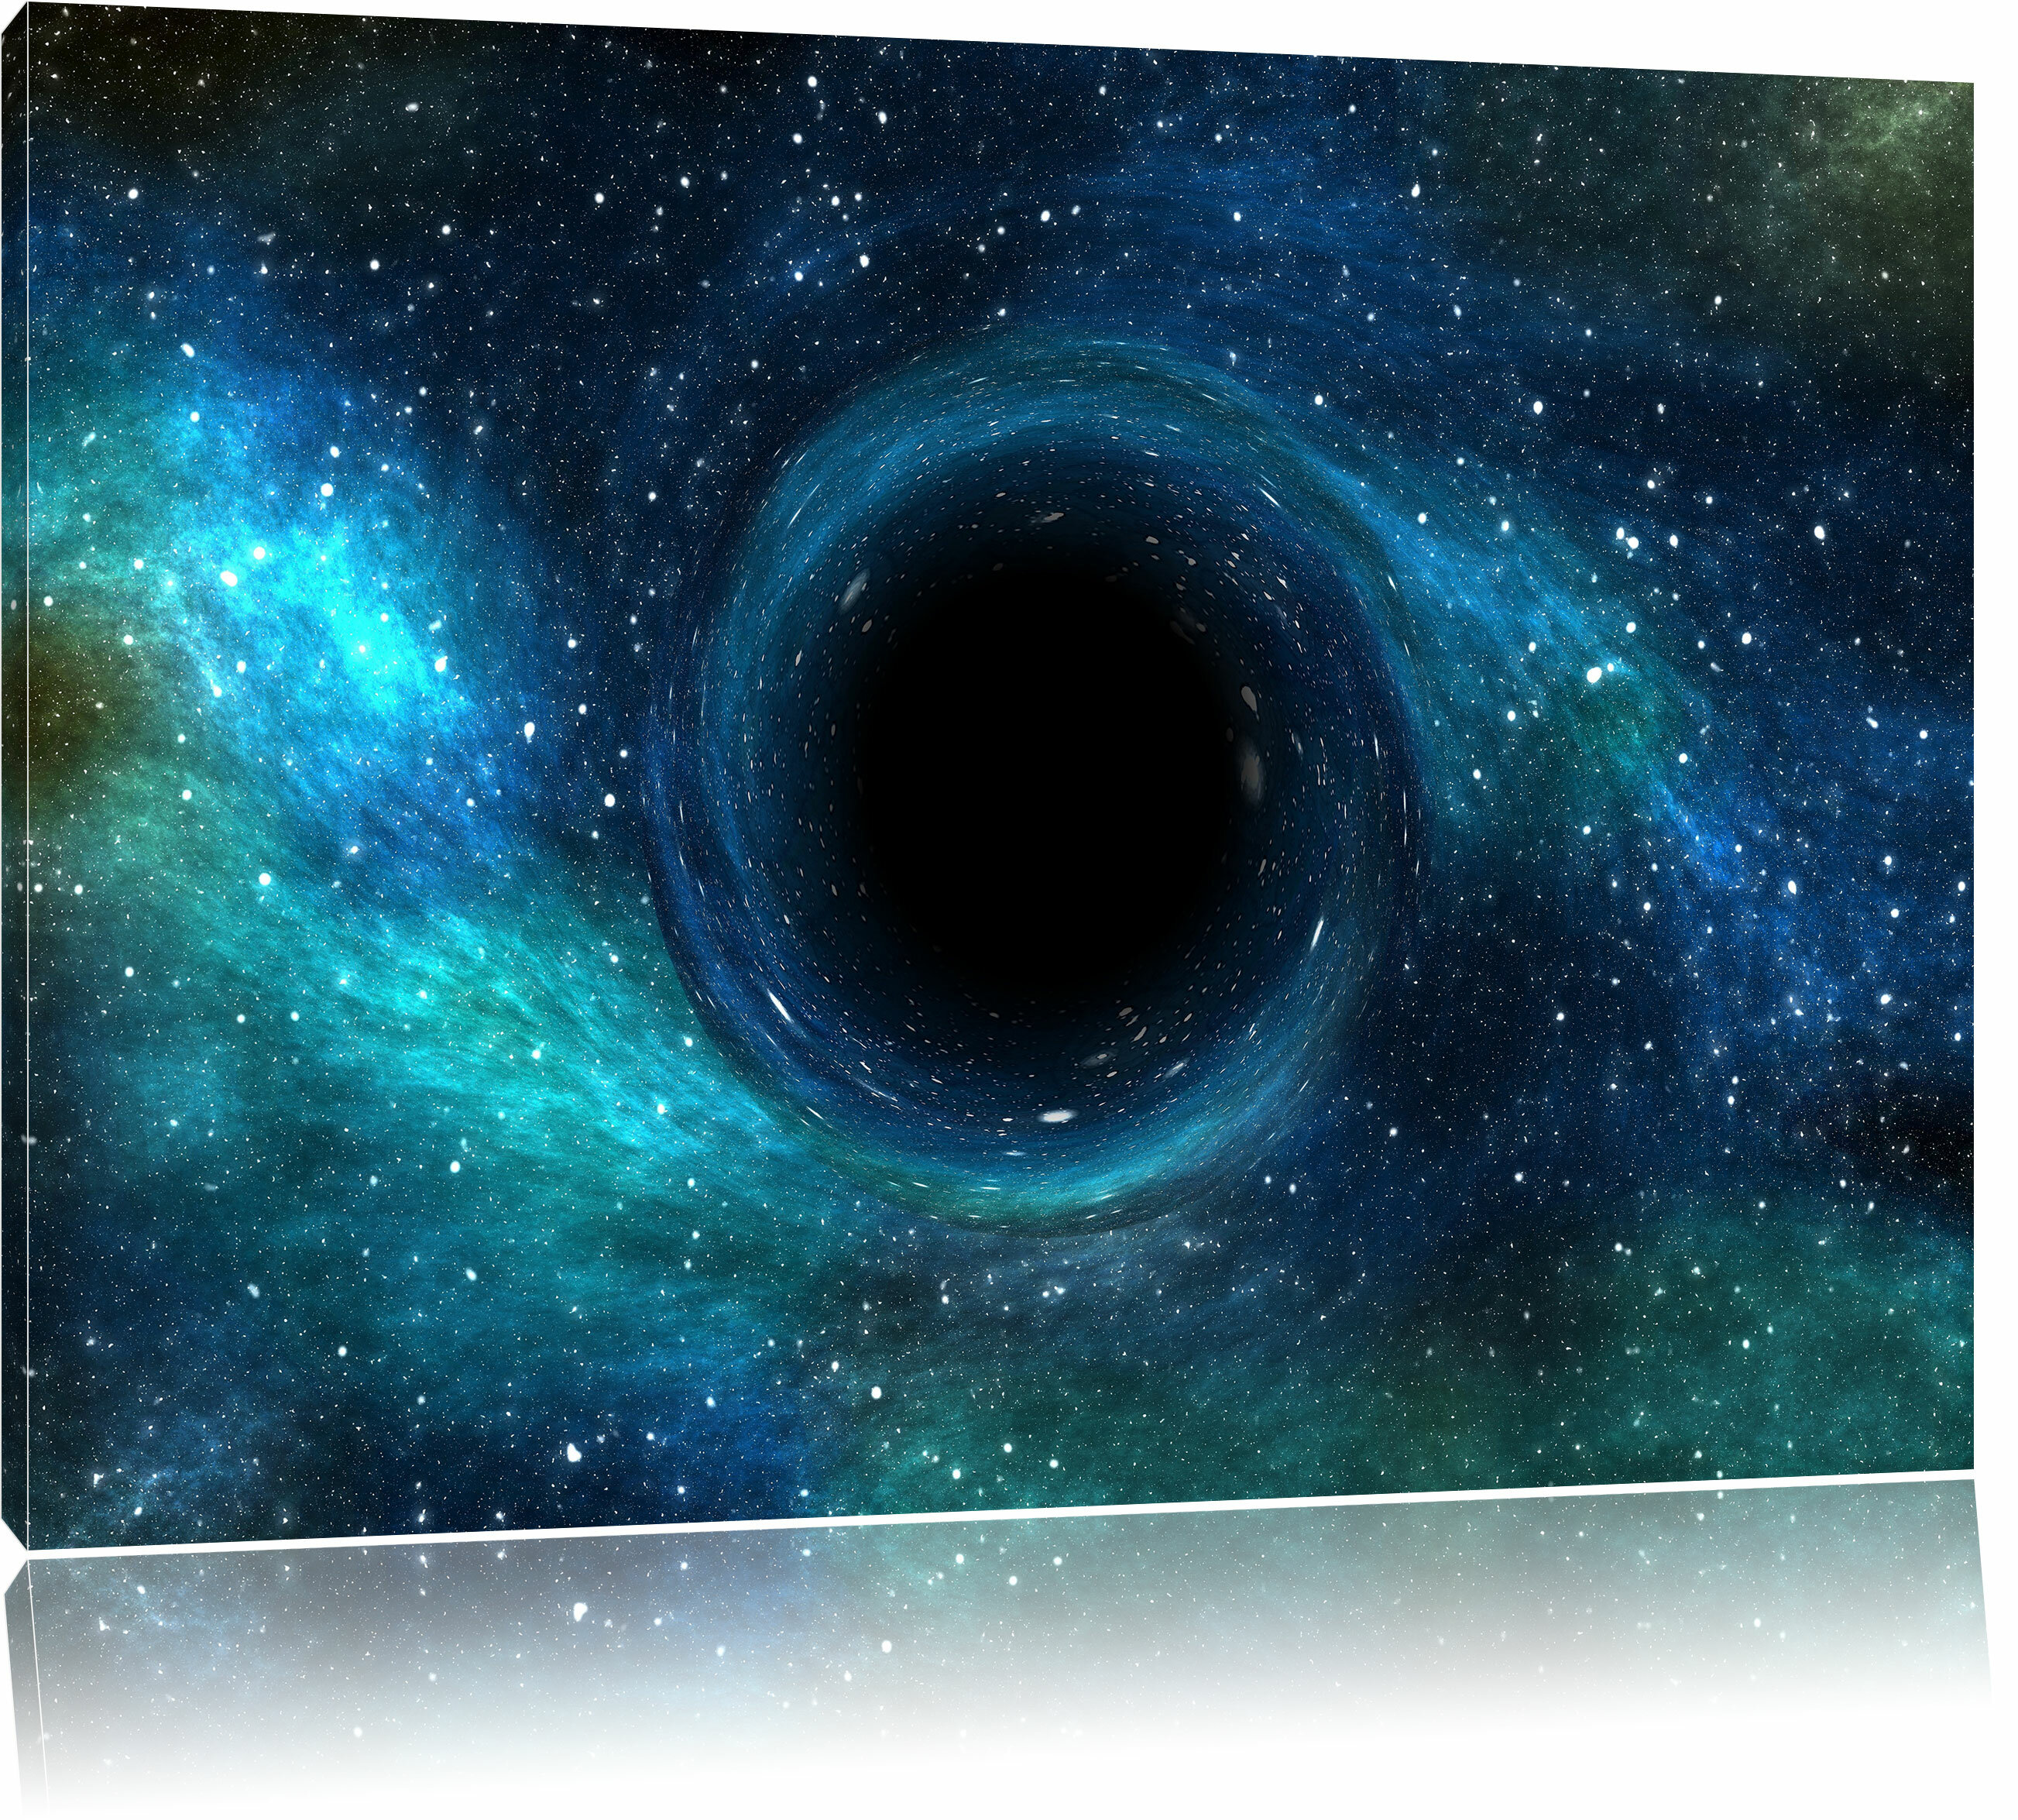 East Urban Home Black Hole In Space Wall Art On Canvas Wayfair Co Uk